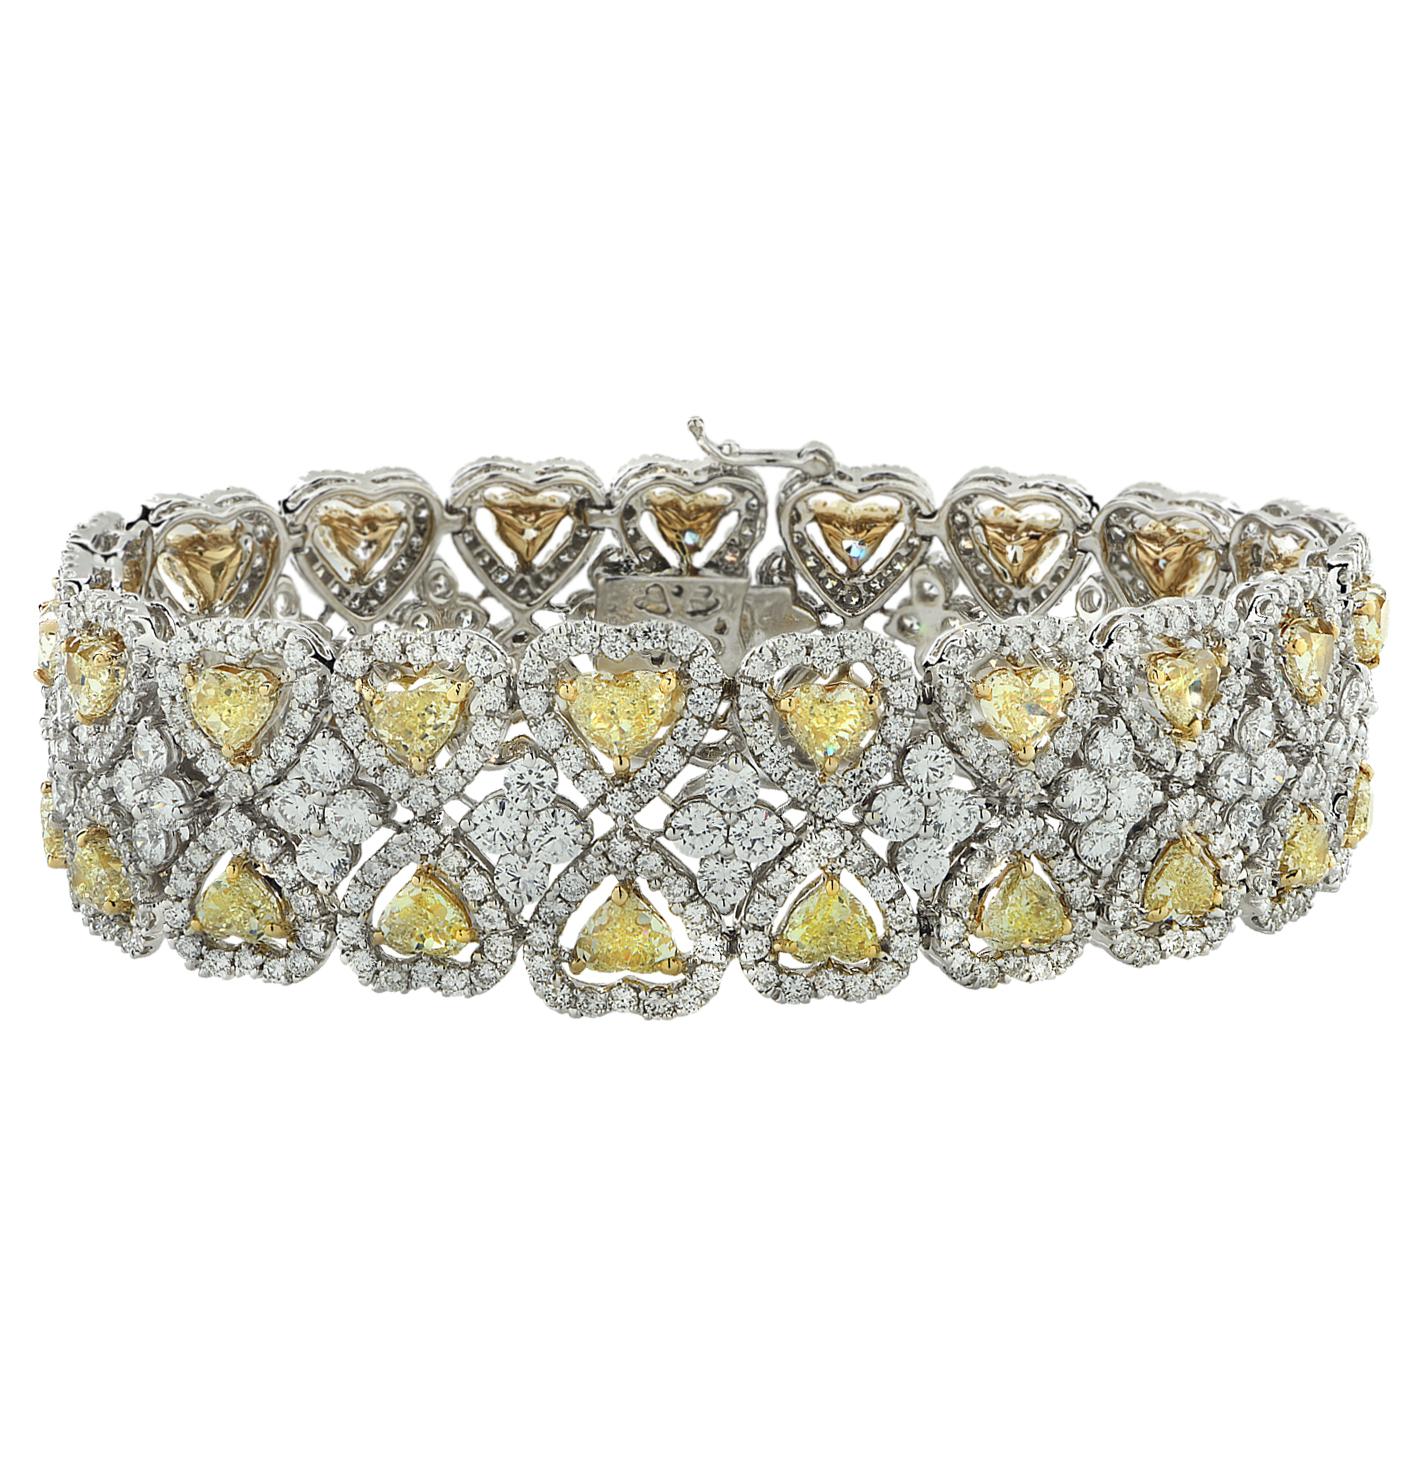 Exquisite diamond bracelet finely crafted in 18 karat white and yellow gold, showcasing 38 fancy yellow heart shape diamonds weighing approximately 13.50 carats total, VS clarity, and 612 round brilliant cut diamonds weighing approximately 12.54